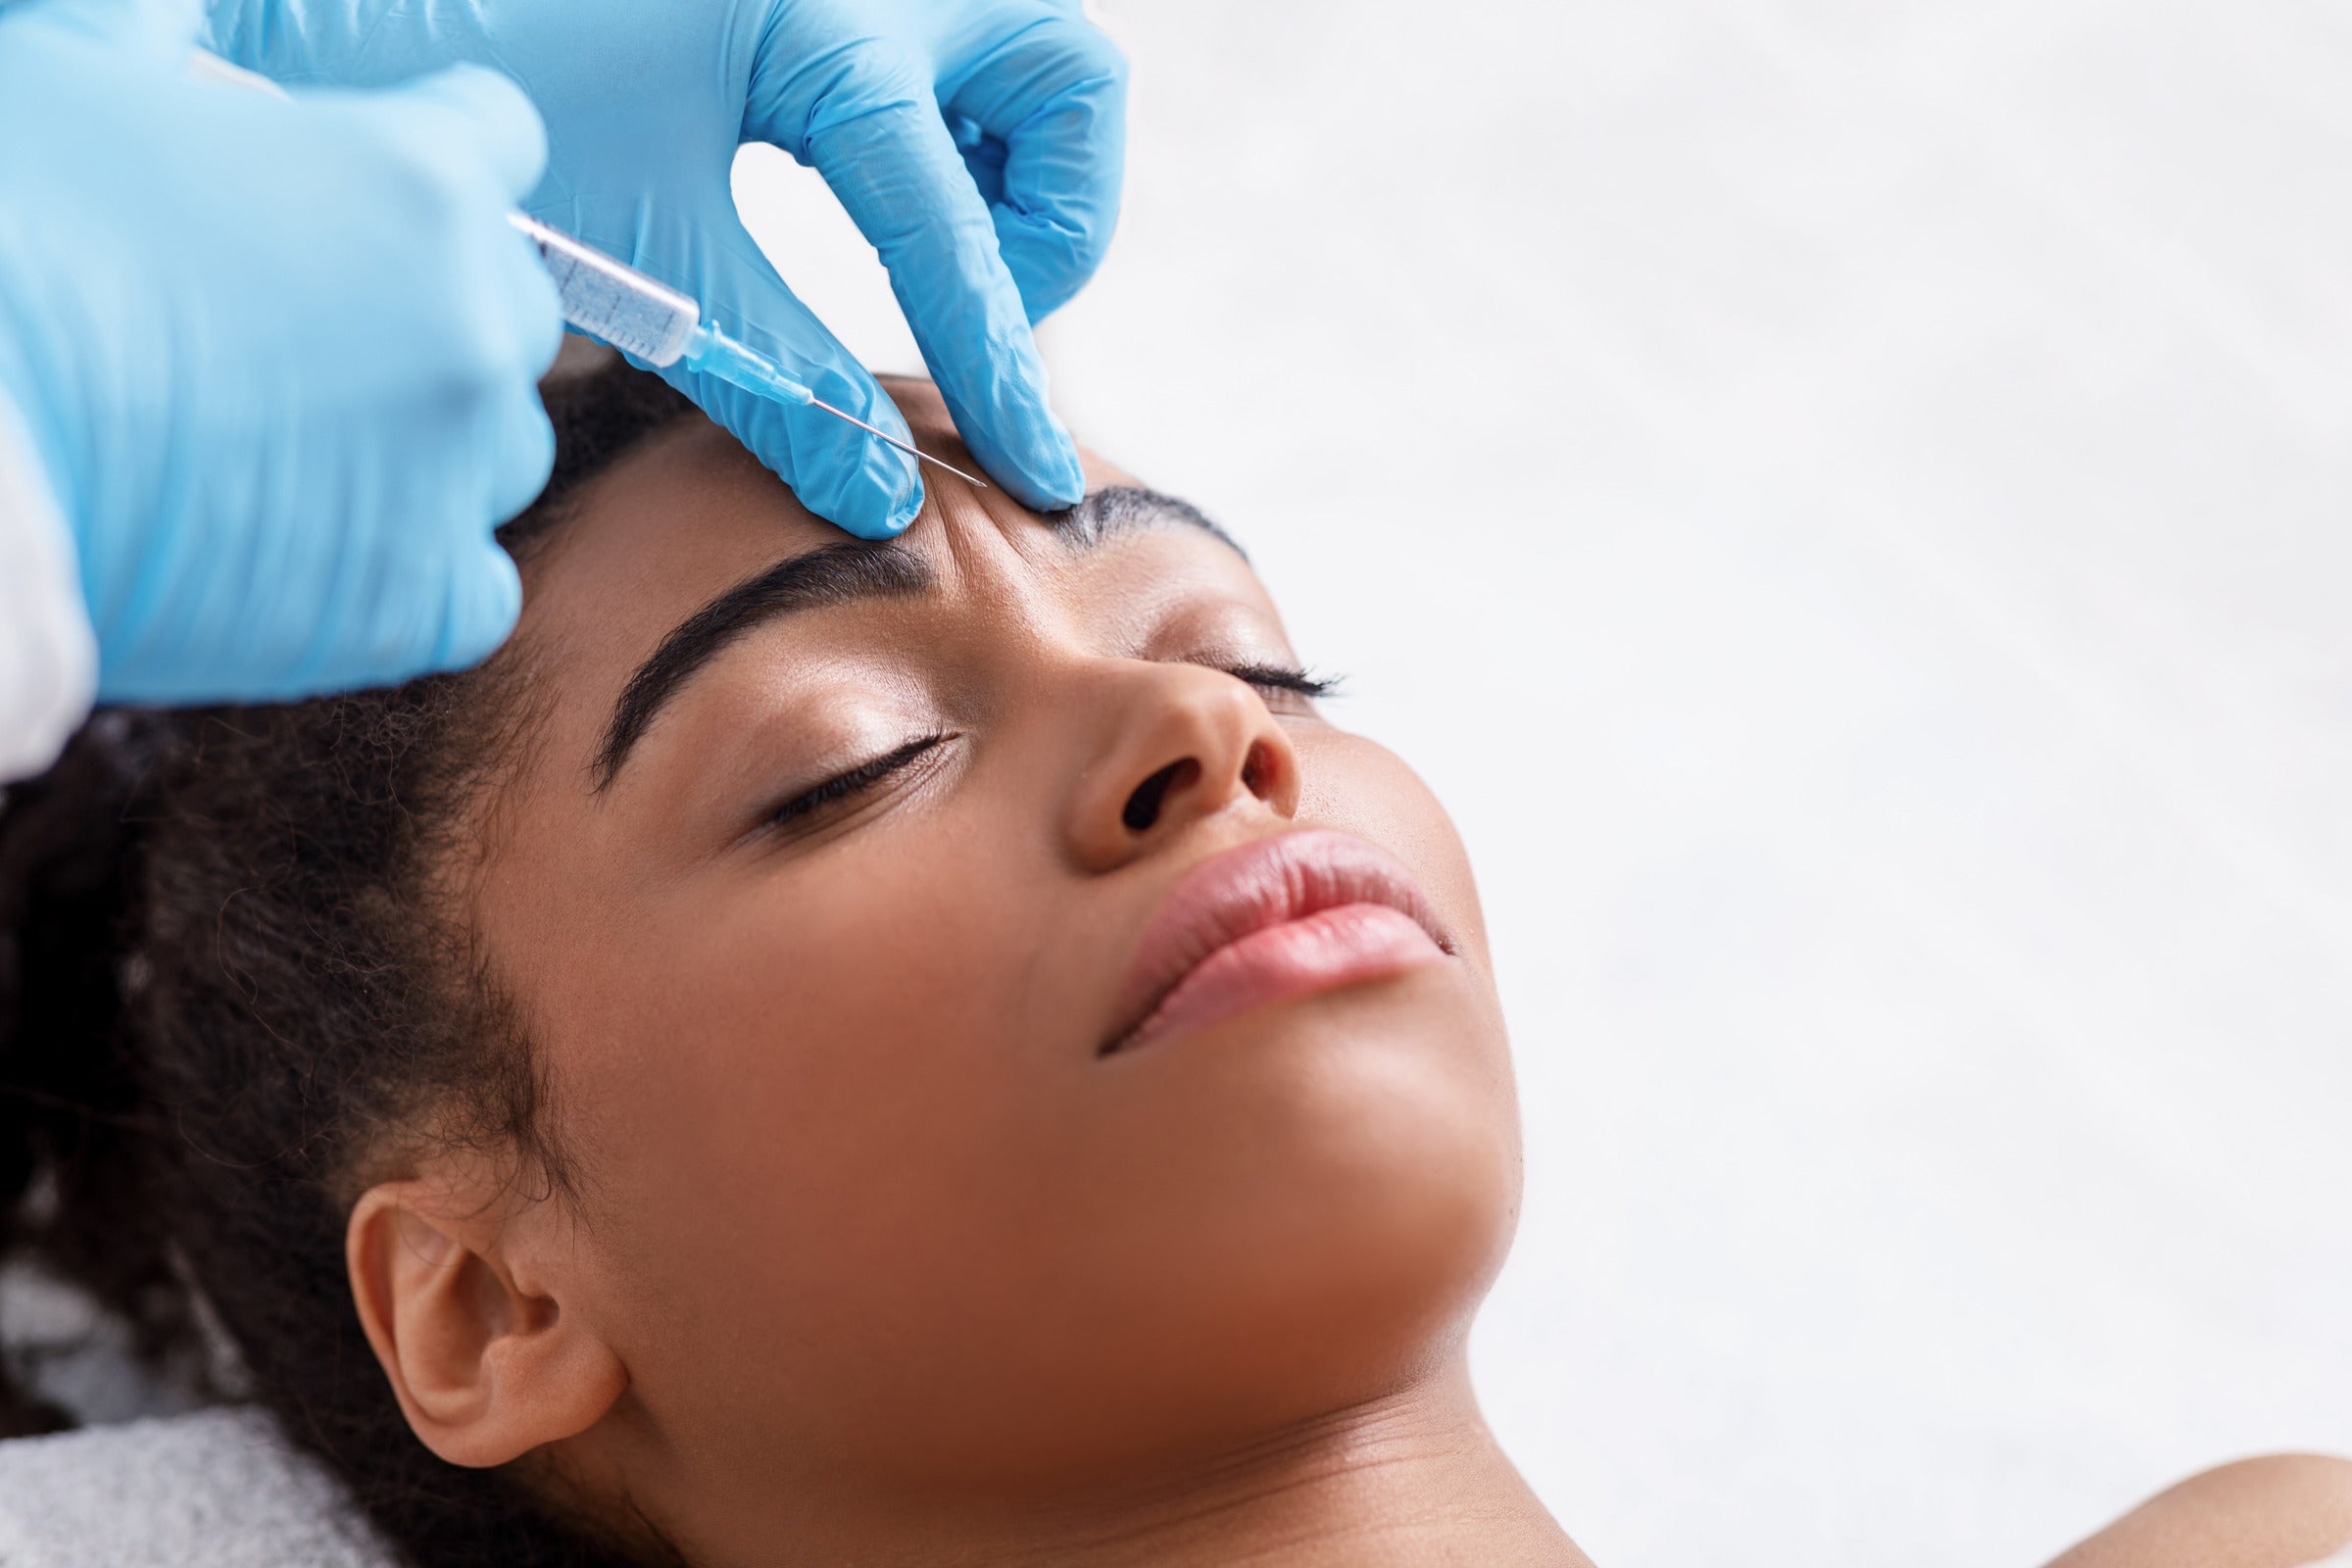 The 3 causes of Botox injection pain